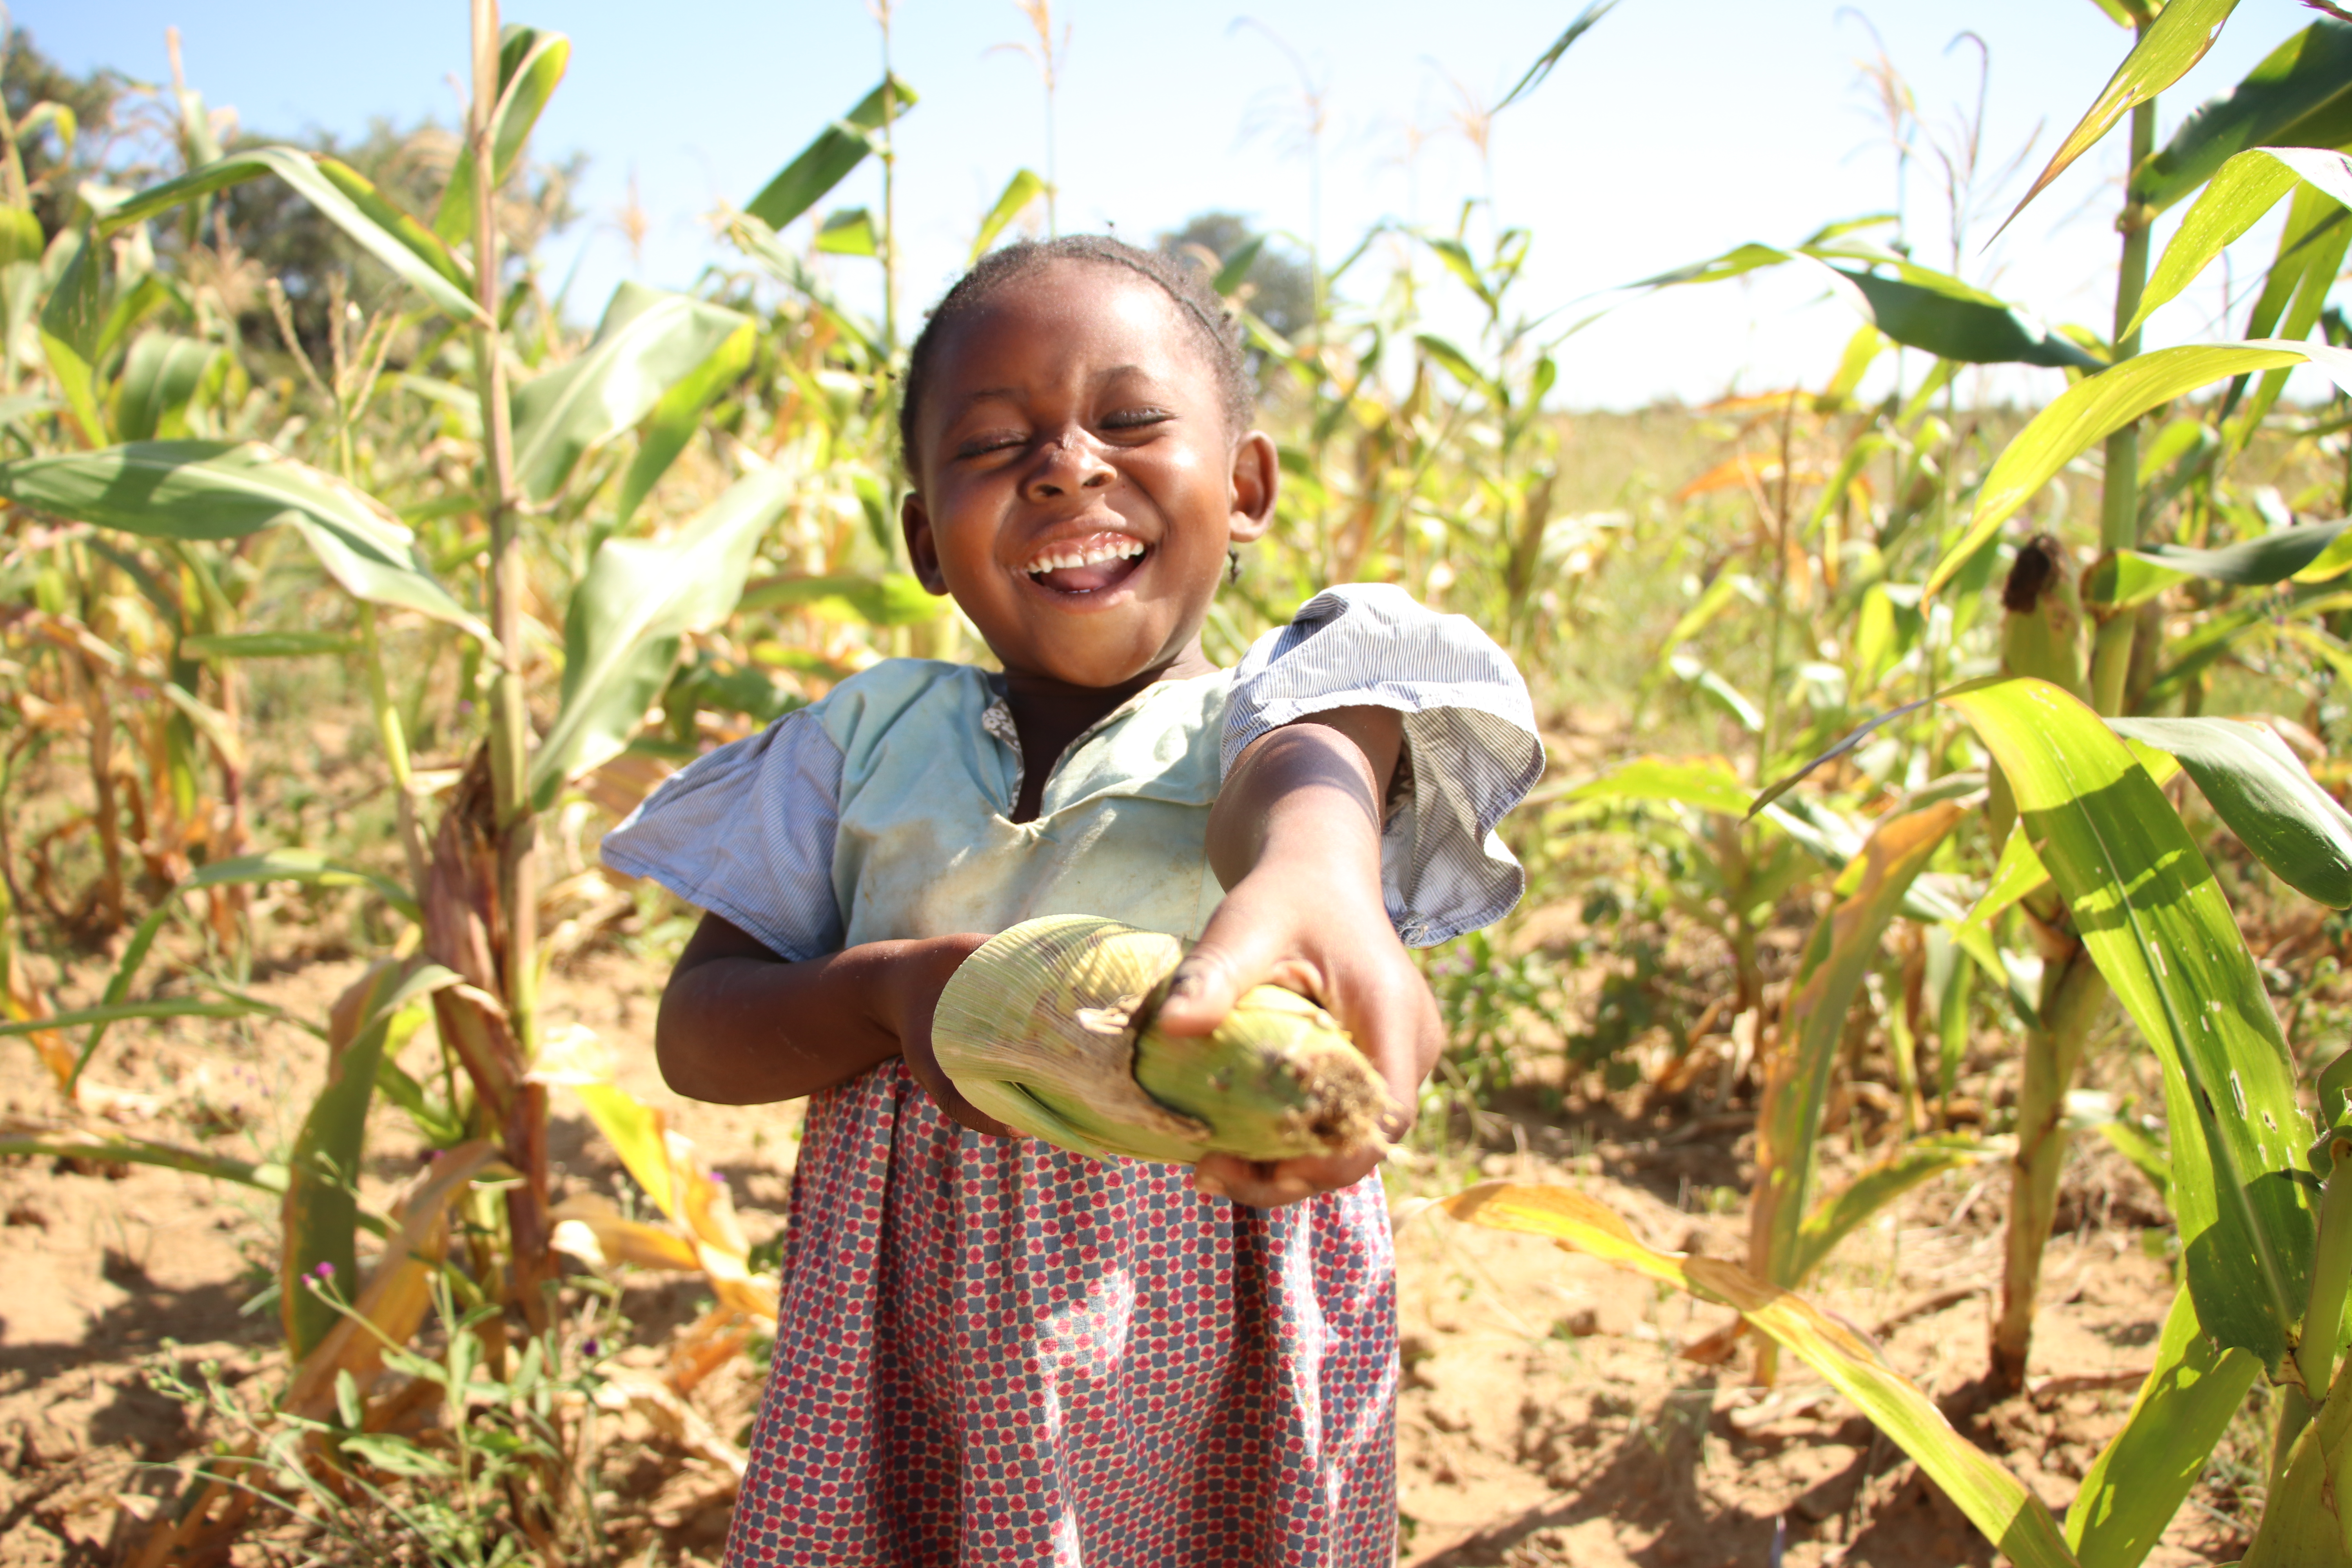 Young girl from Zambia holding a fresh corn and smiling with a corn field behind her